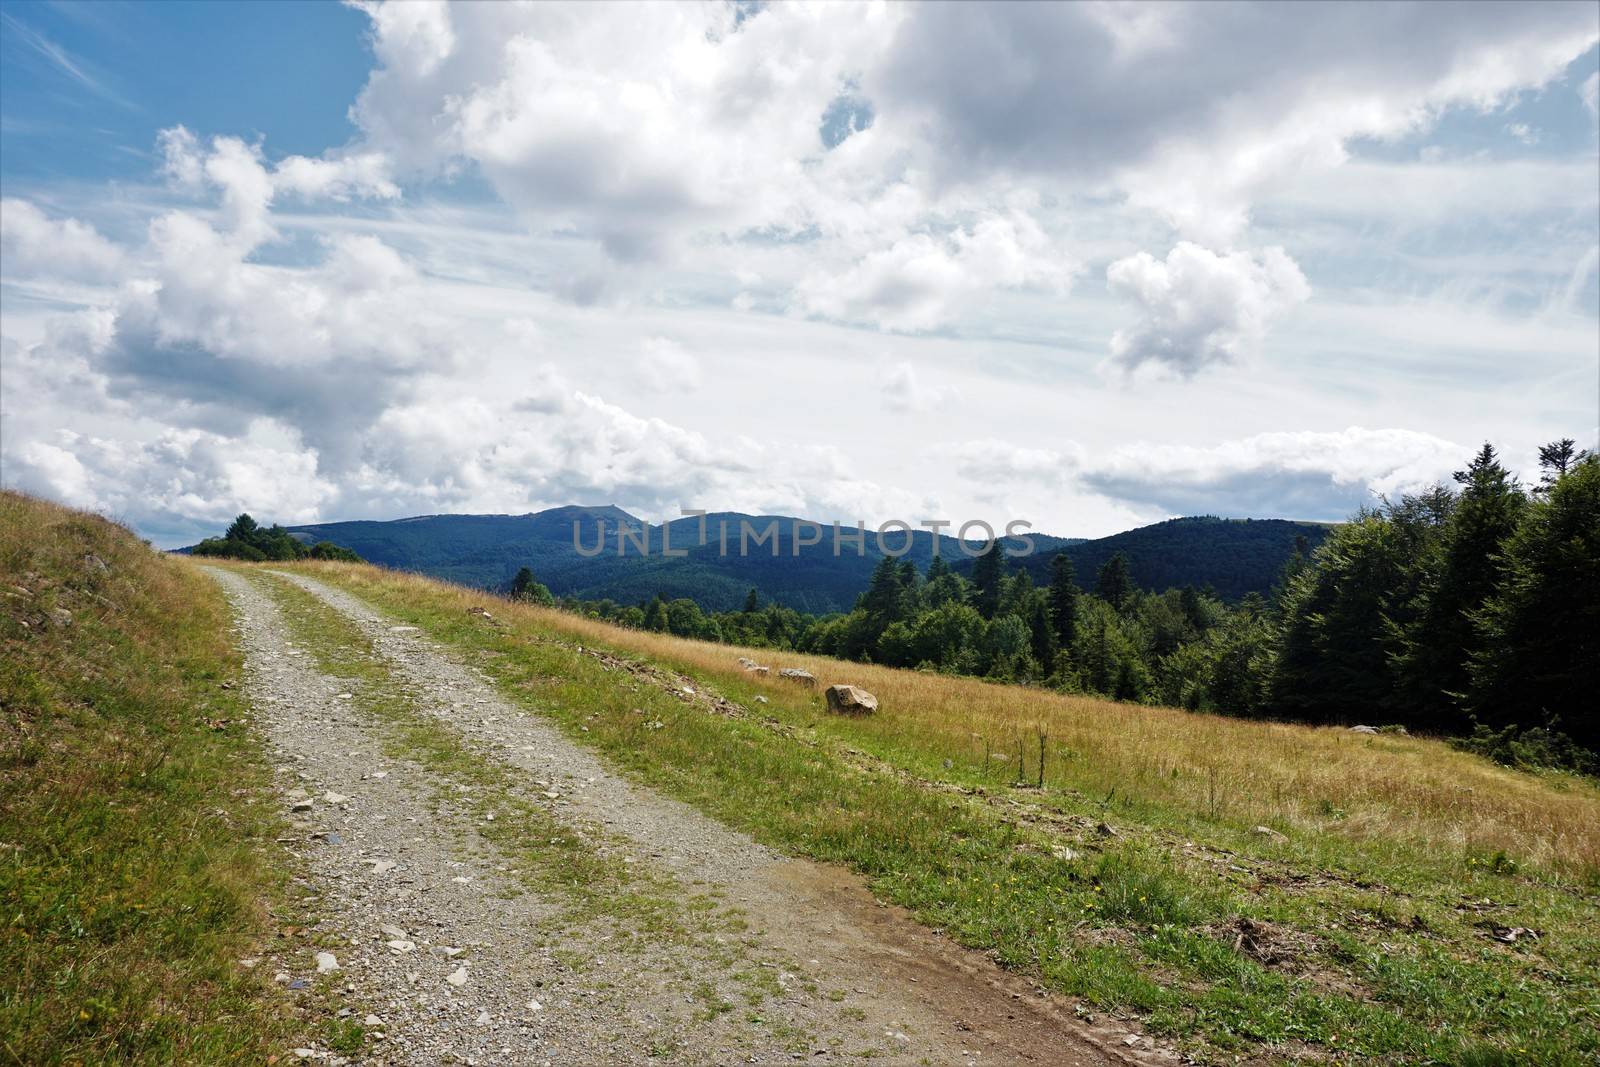 Dirt road in front of mountain ridges of the Vosges, France